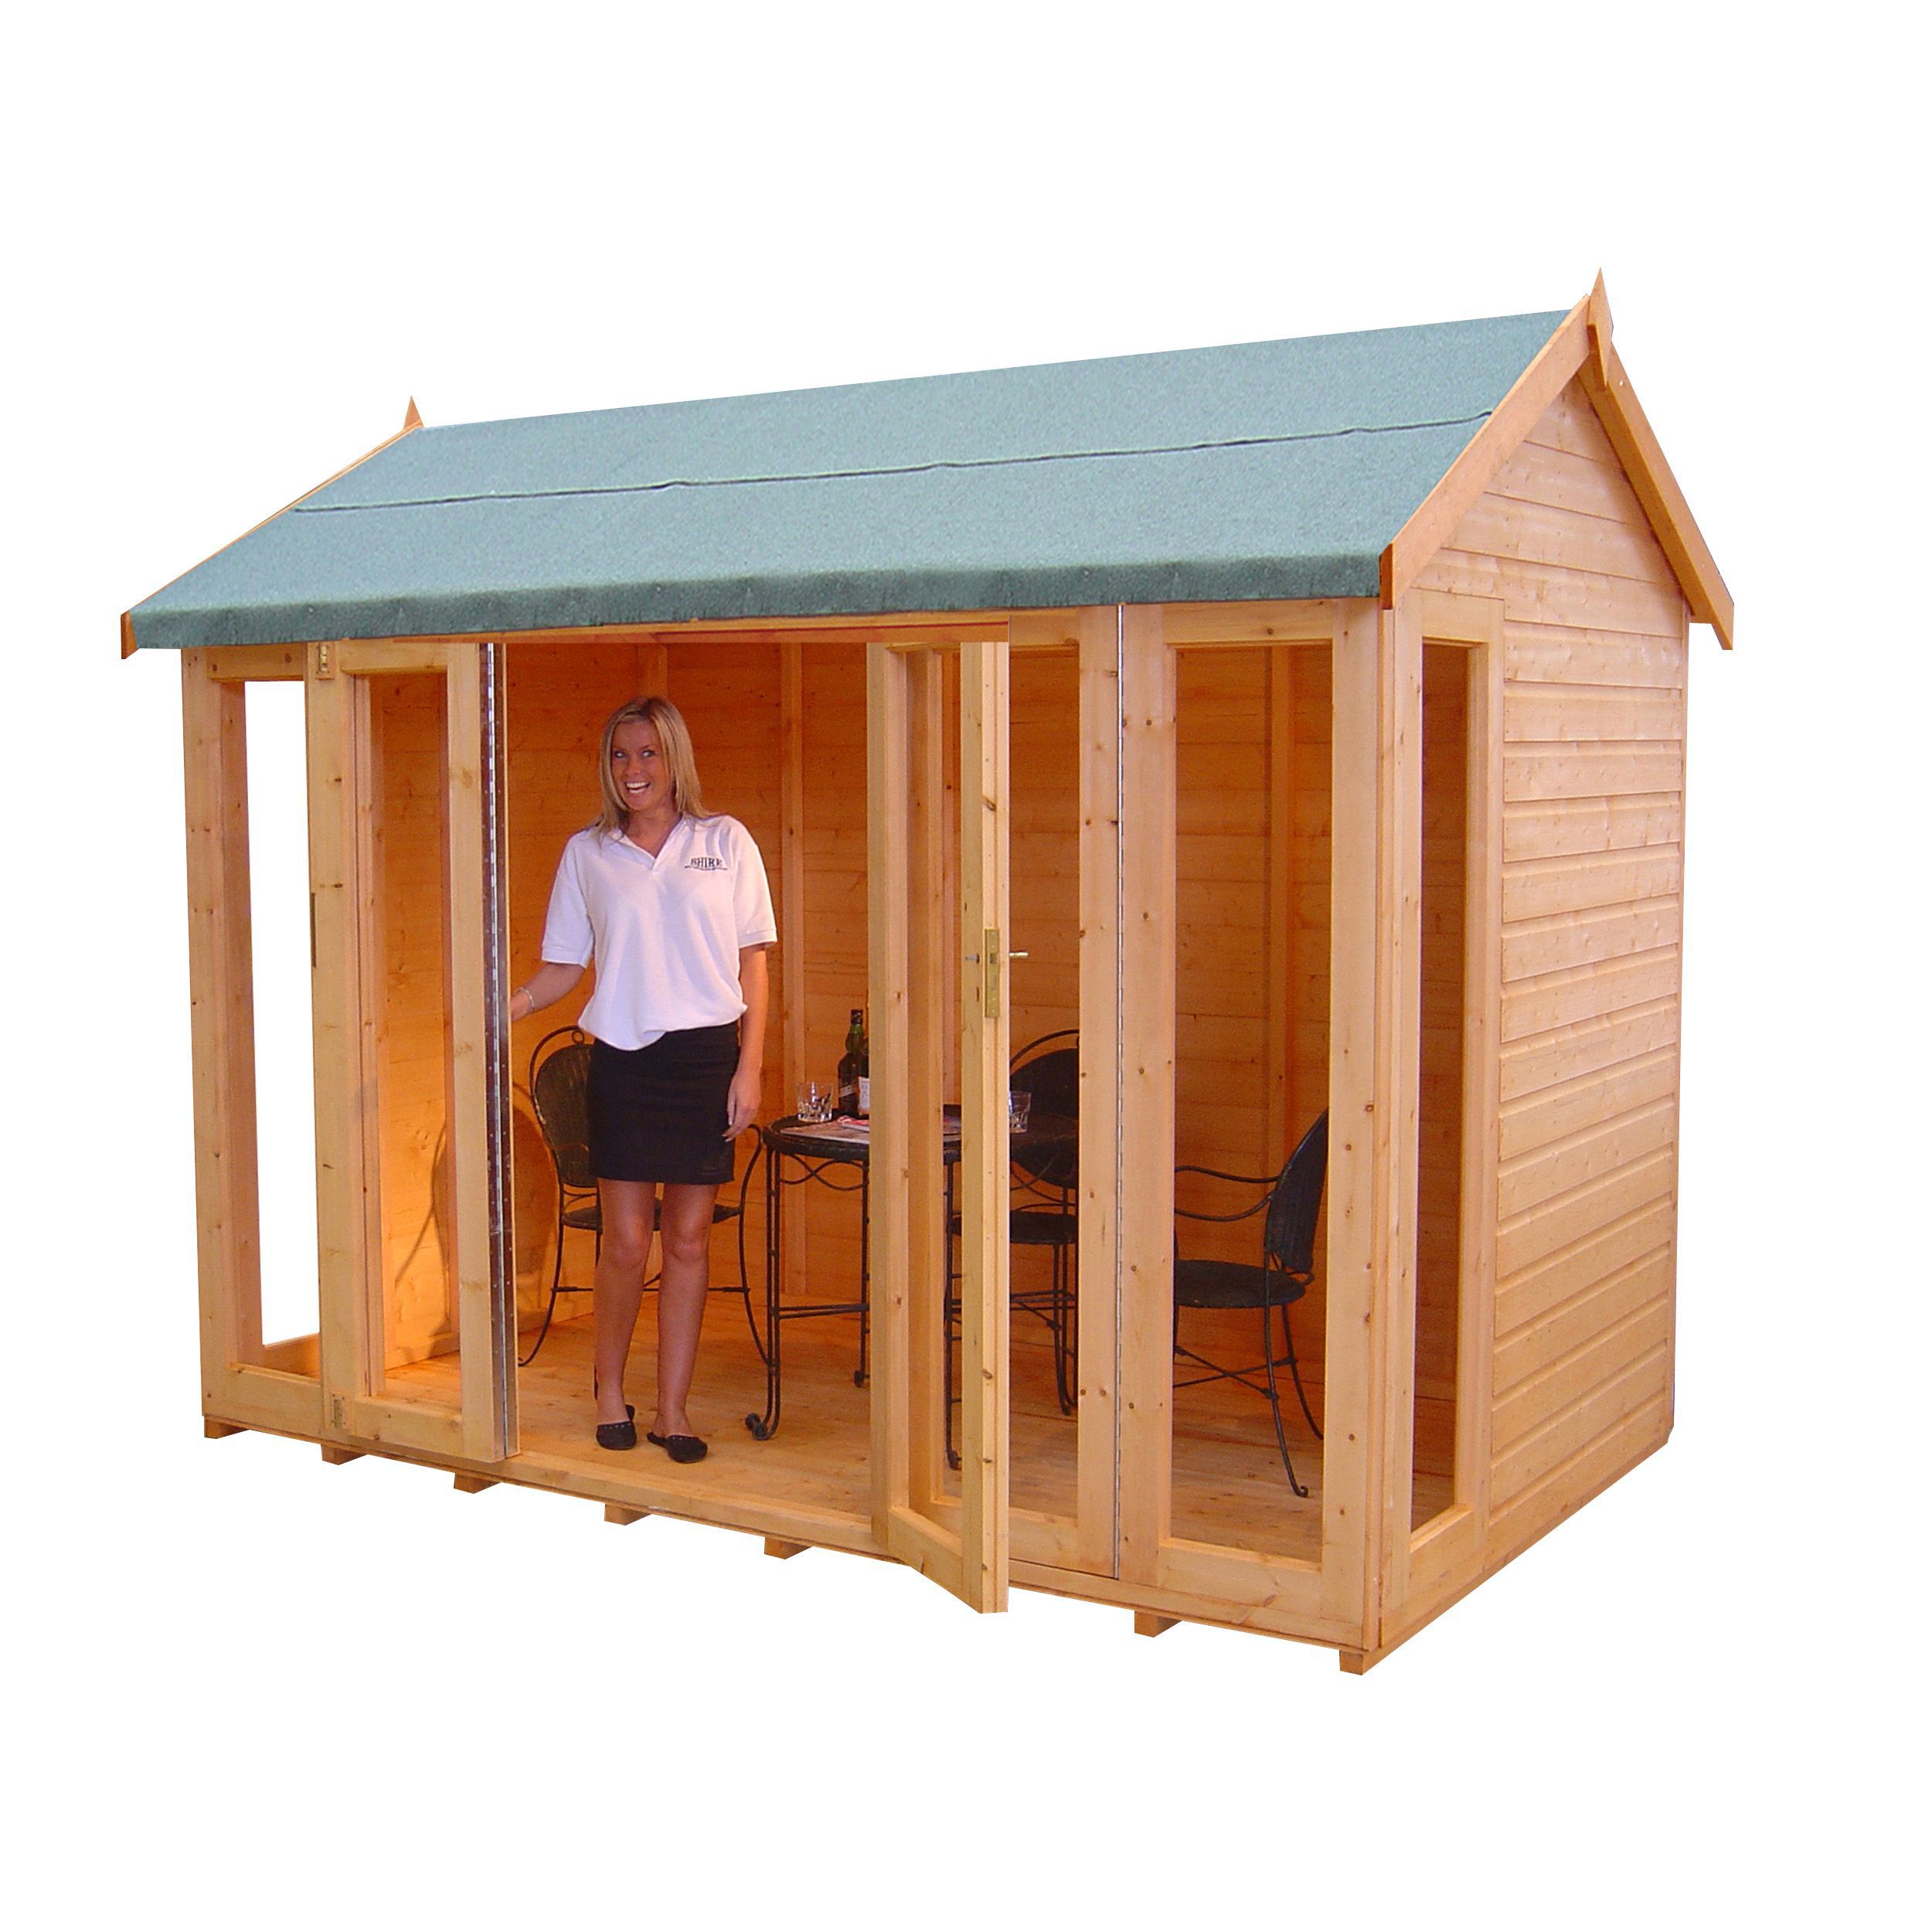 Shire Blenheim 10x8 Apex Shiplap Wooden Summer house - Assembly service included